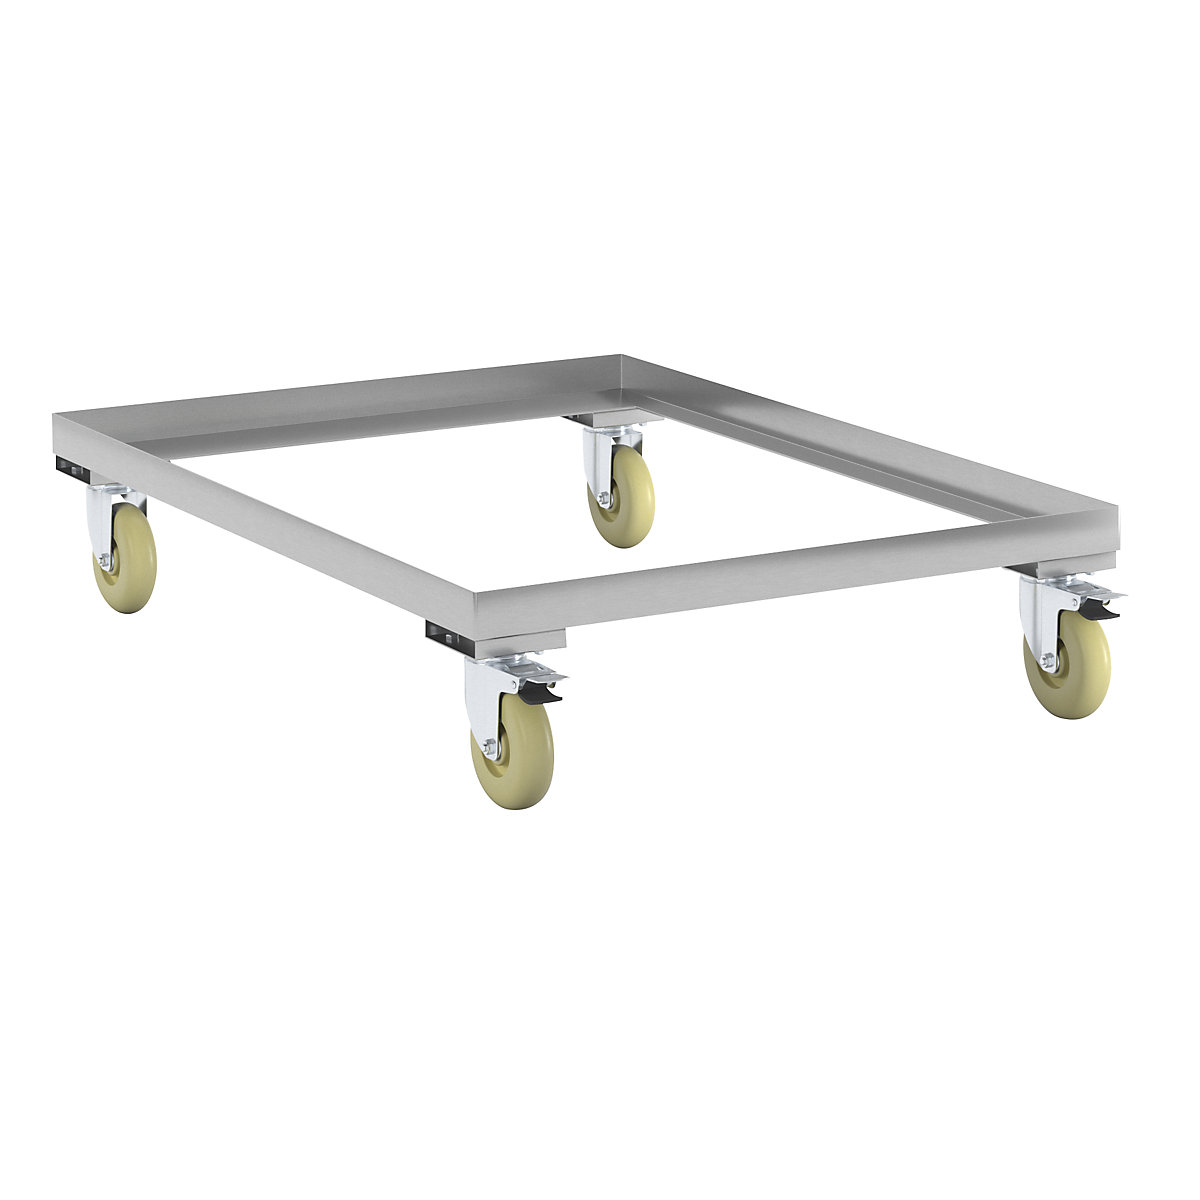 Stainless steel dolly